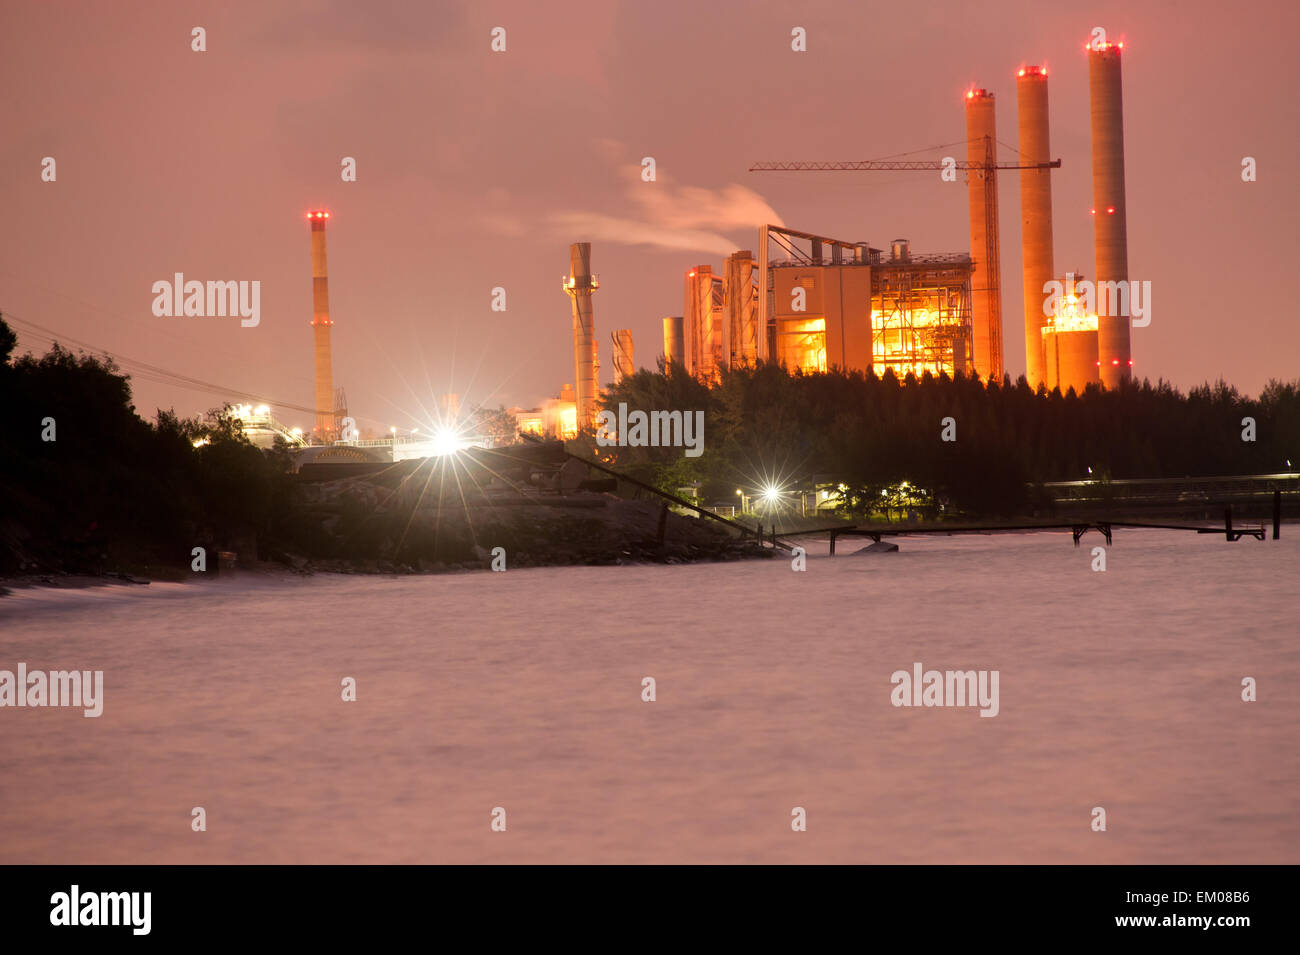 A smoking industrial power plant on seaside at night Stock Photo